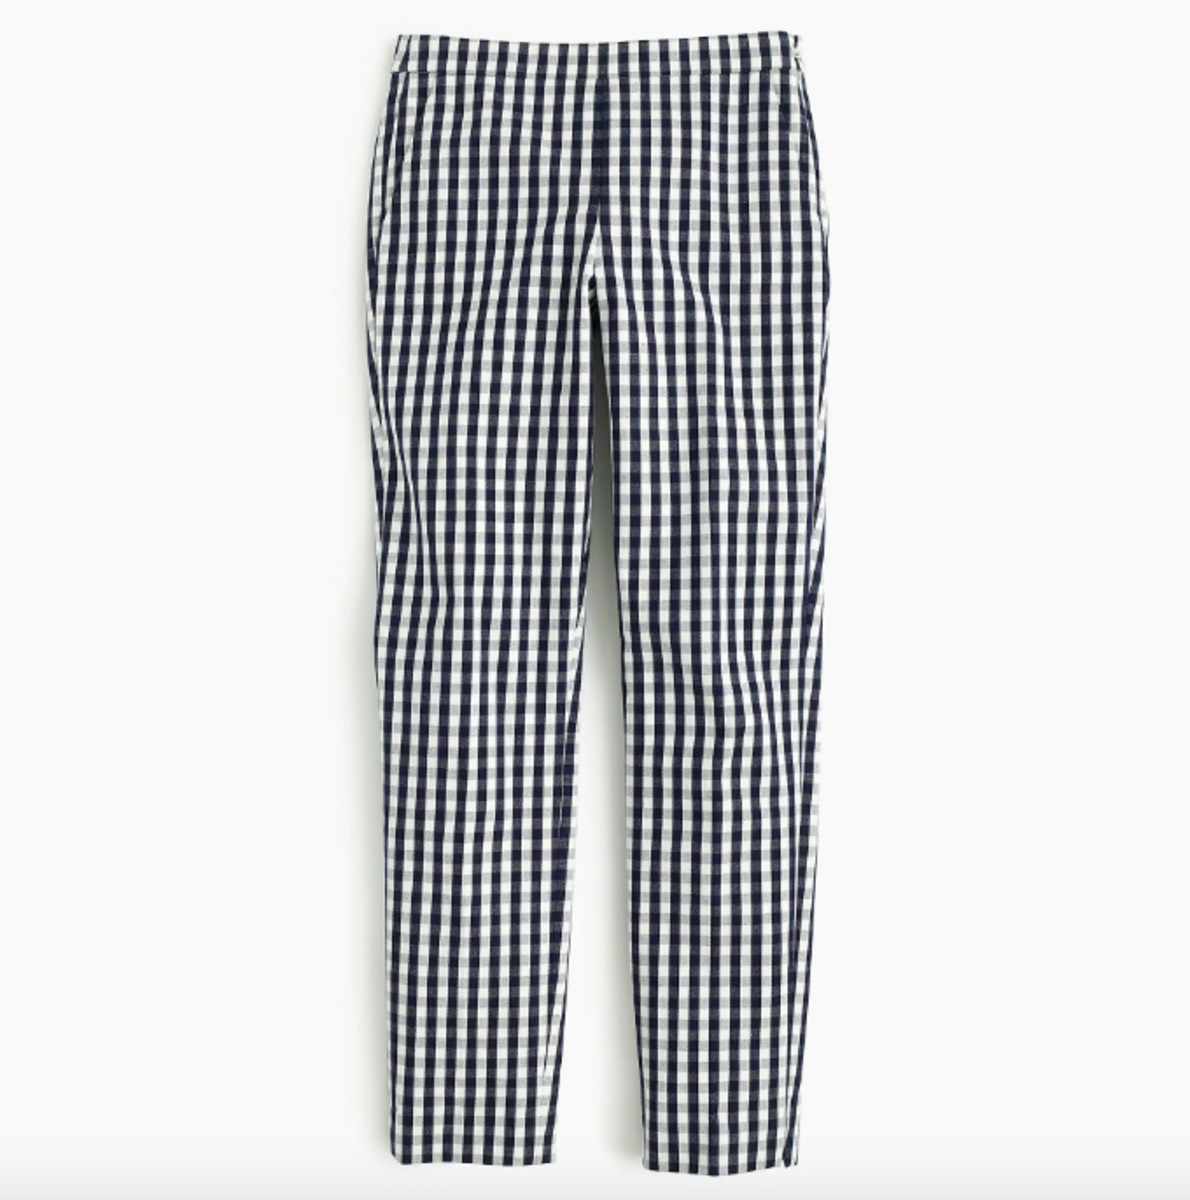 The Gingham Pants Tyler Promises Not to Wear to a Picnic - Fashionista